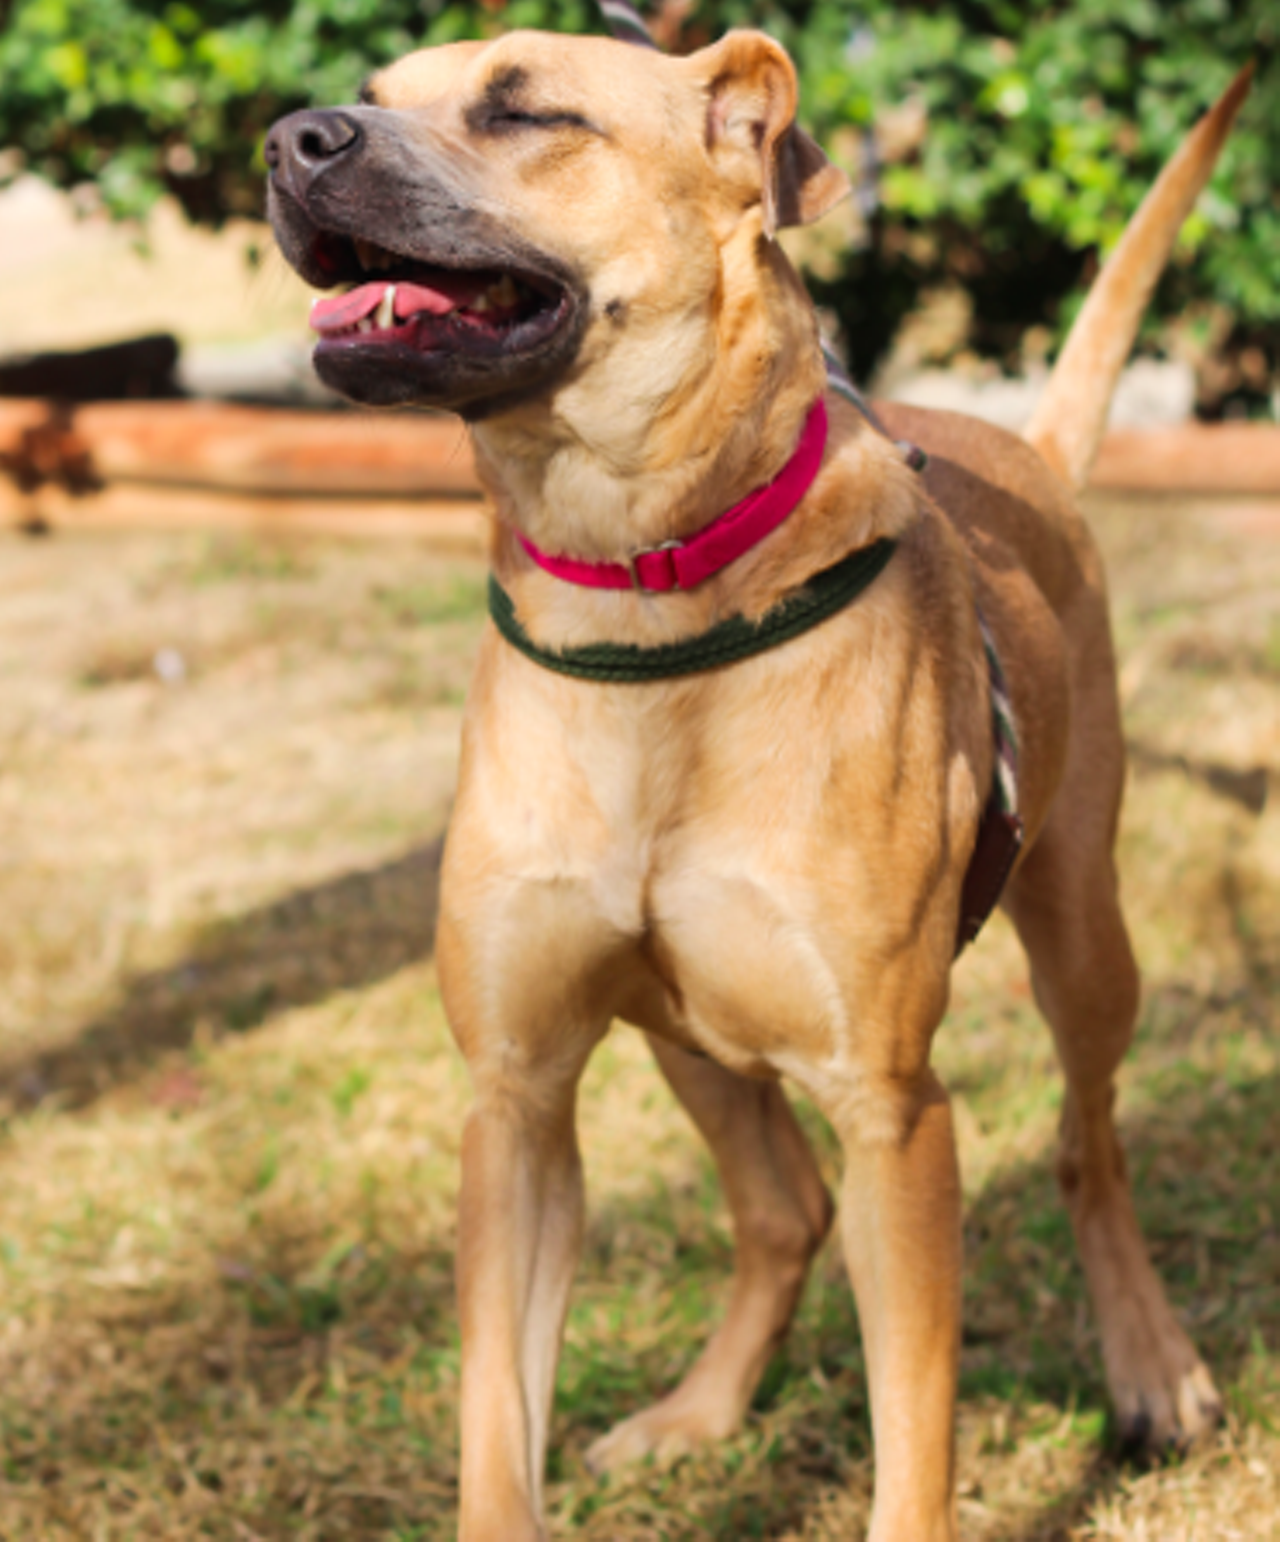 Leticia
"Hi everyone! I enjoy showing everyone my smile! I enjoy being out and about on a nice day. I love going on walks to get to know other people around me. I keep getting told that I like to act goofy which of course I do, its fun!"